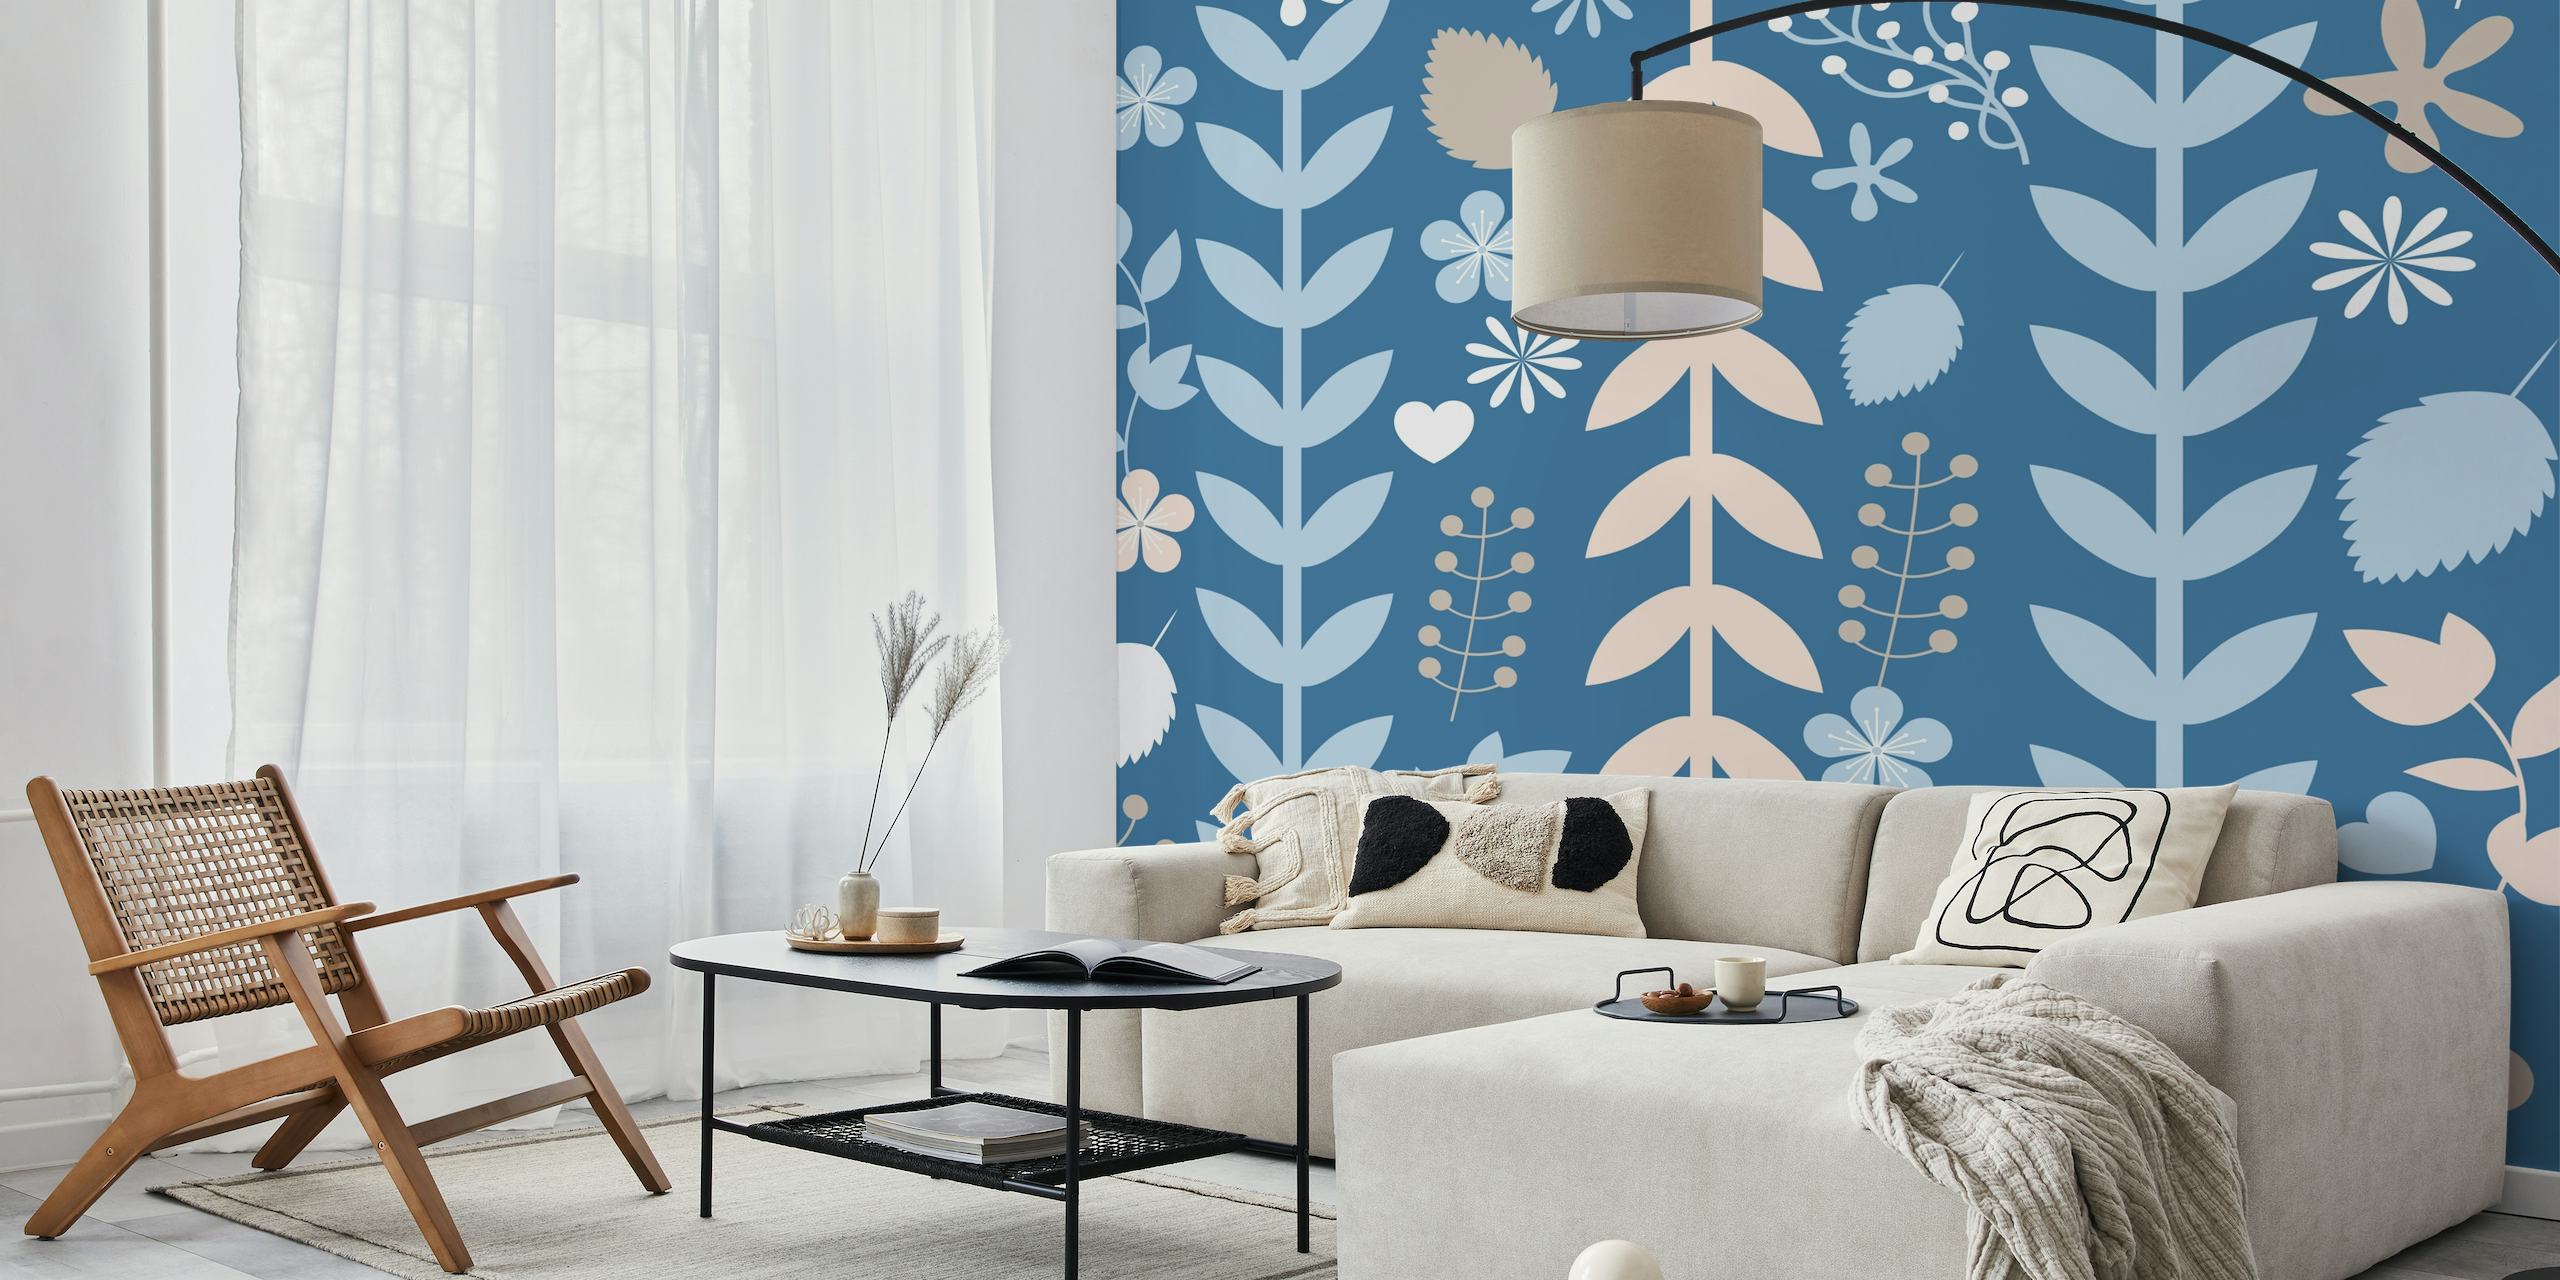 Denim Blue Pink Leaves wall mural featuring botanical leaf patterns in pink and denim blue on a muted blue background.